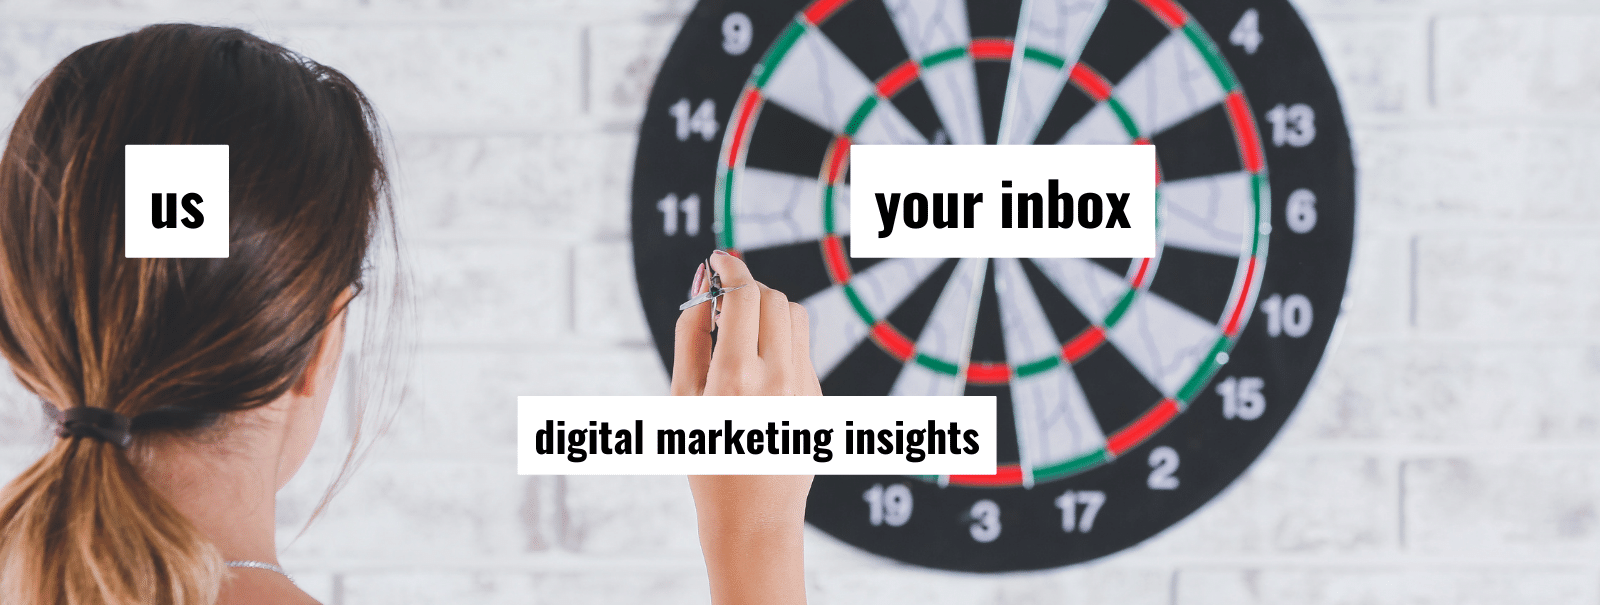 A woman plays darts. Over her head is the text "us", over the dart board is the text "your inbox", and over the dart is the text "digital marketing insights" to symbolize the concept of Digital Strike - Targeted Marketing using low-effort memes to entice people to sign up for the Bullseye digital marketing newsletter.